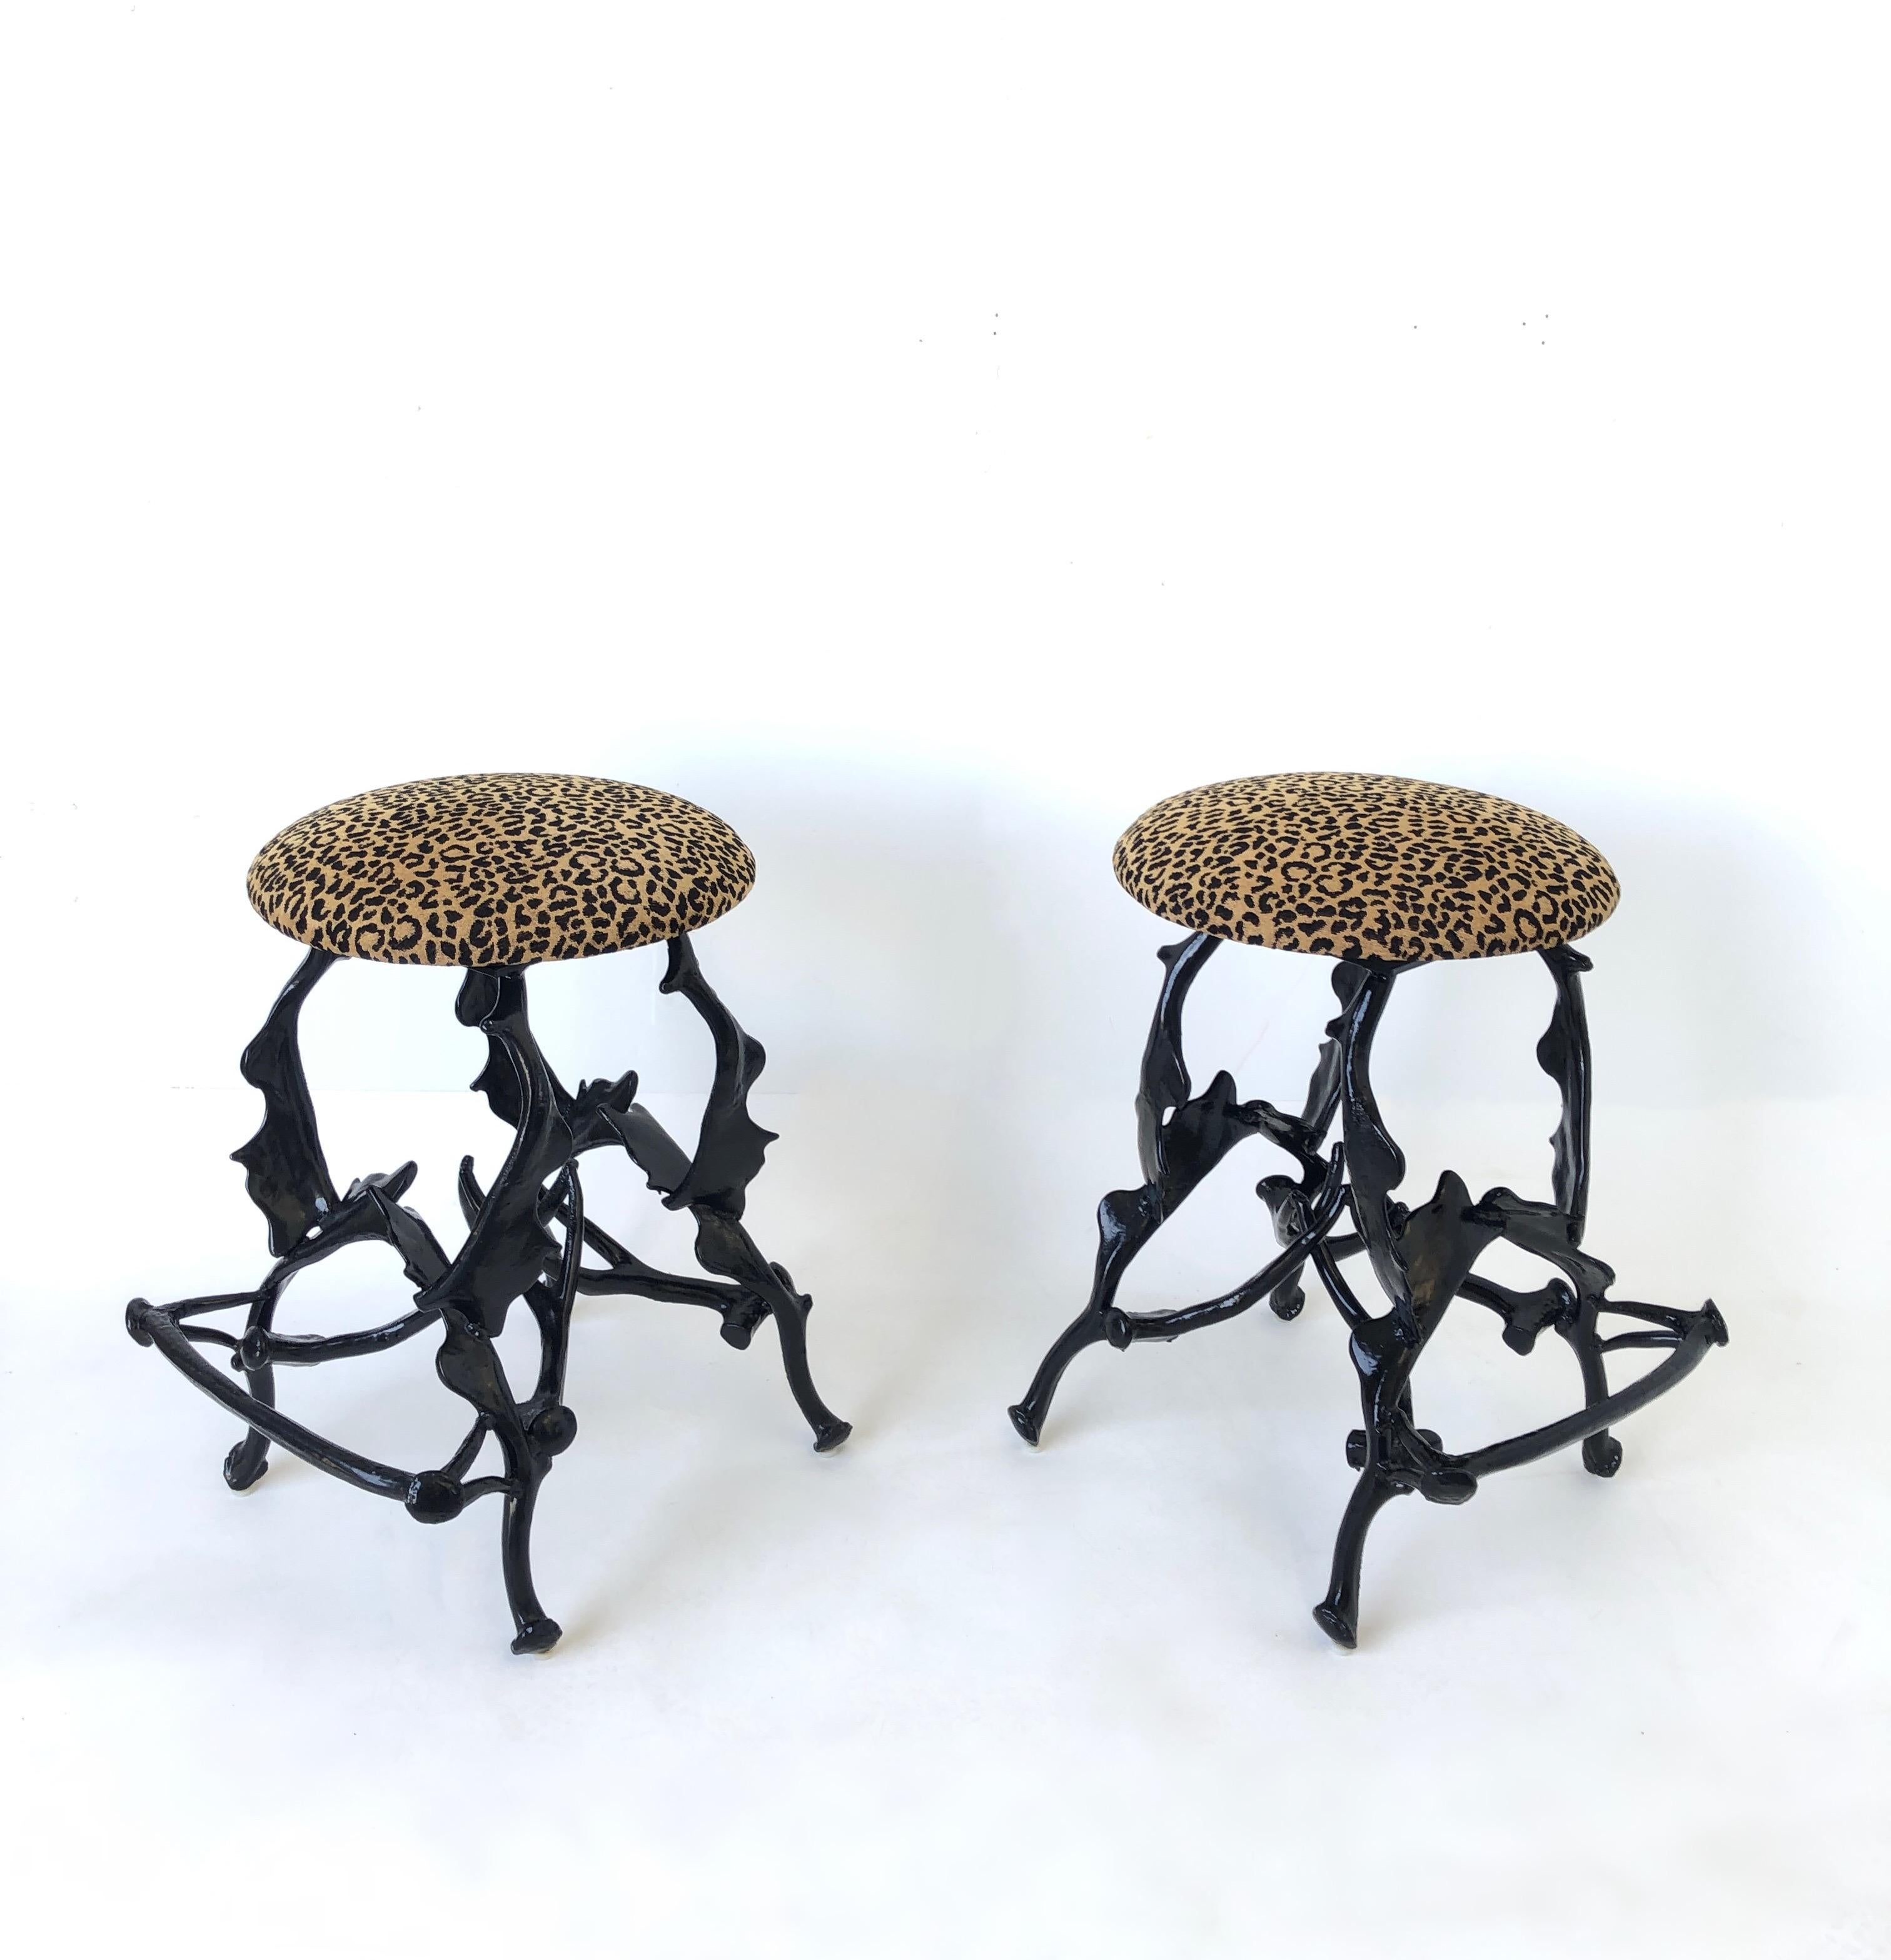 Regency Pair of Black Powder Coated Faux Antler Bar Stools by Arthur Court For Sale